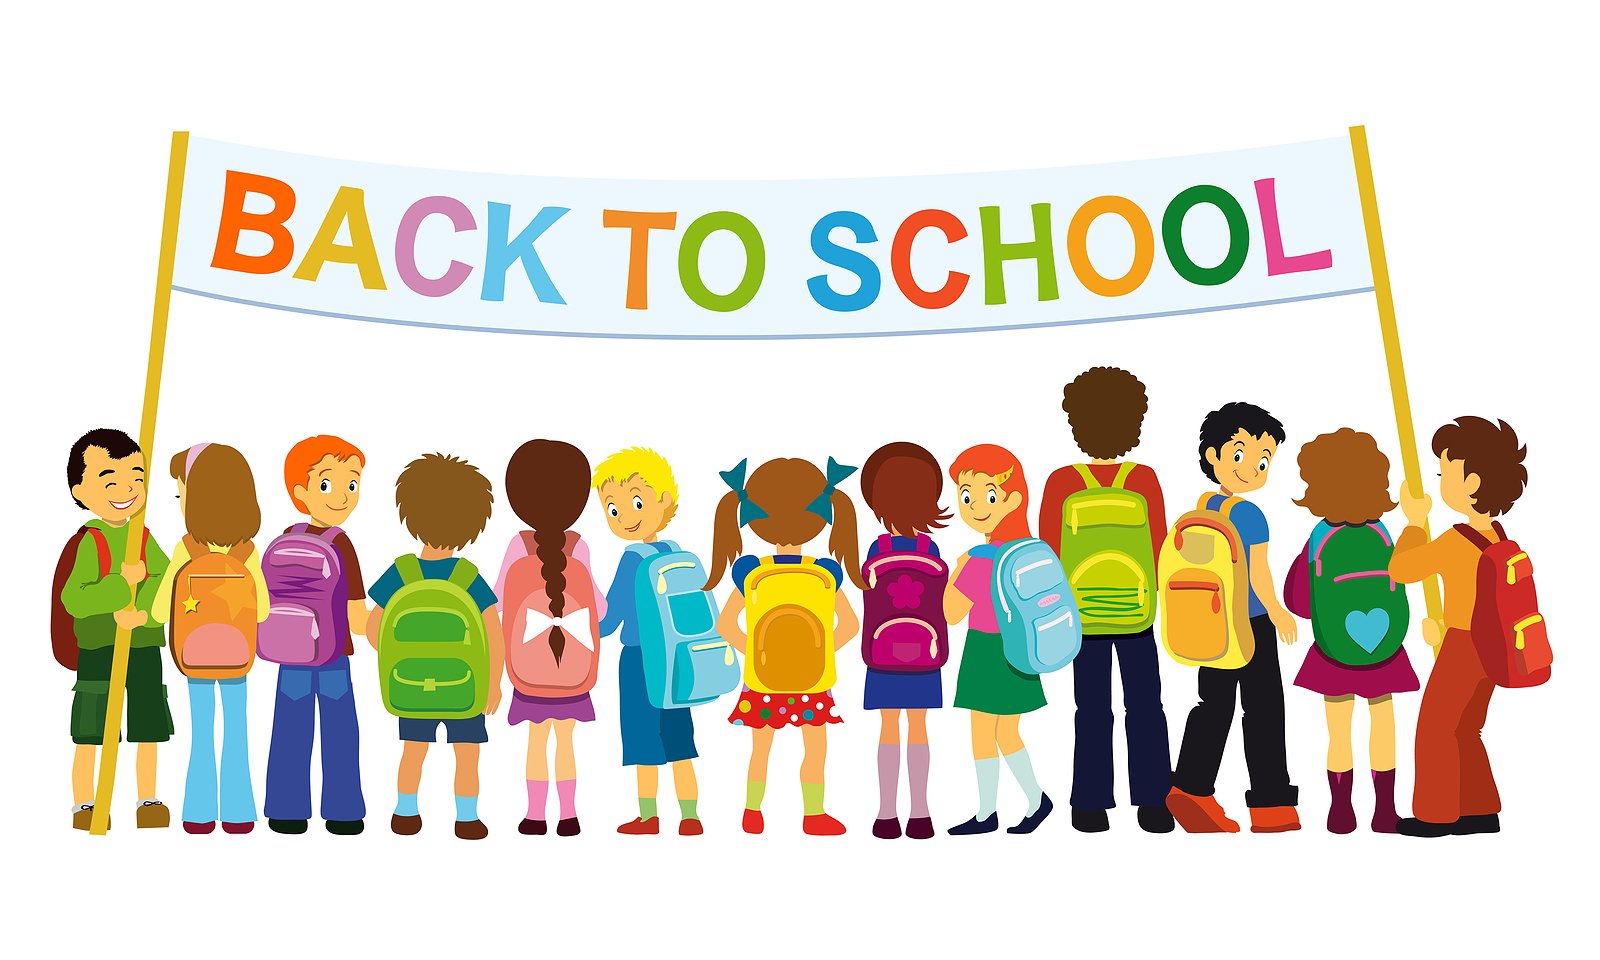 Welcome students. Welcome школа. Плакат Welcome back to School. Постеры для школы. Back to School картинки.